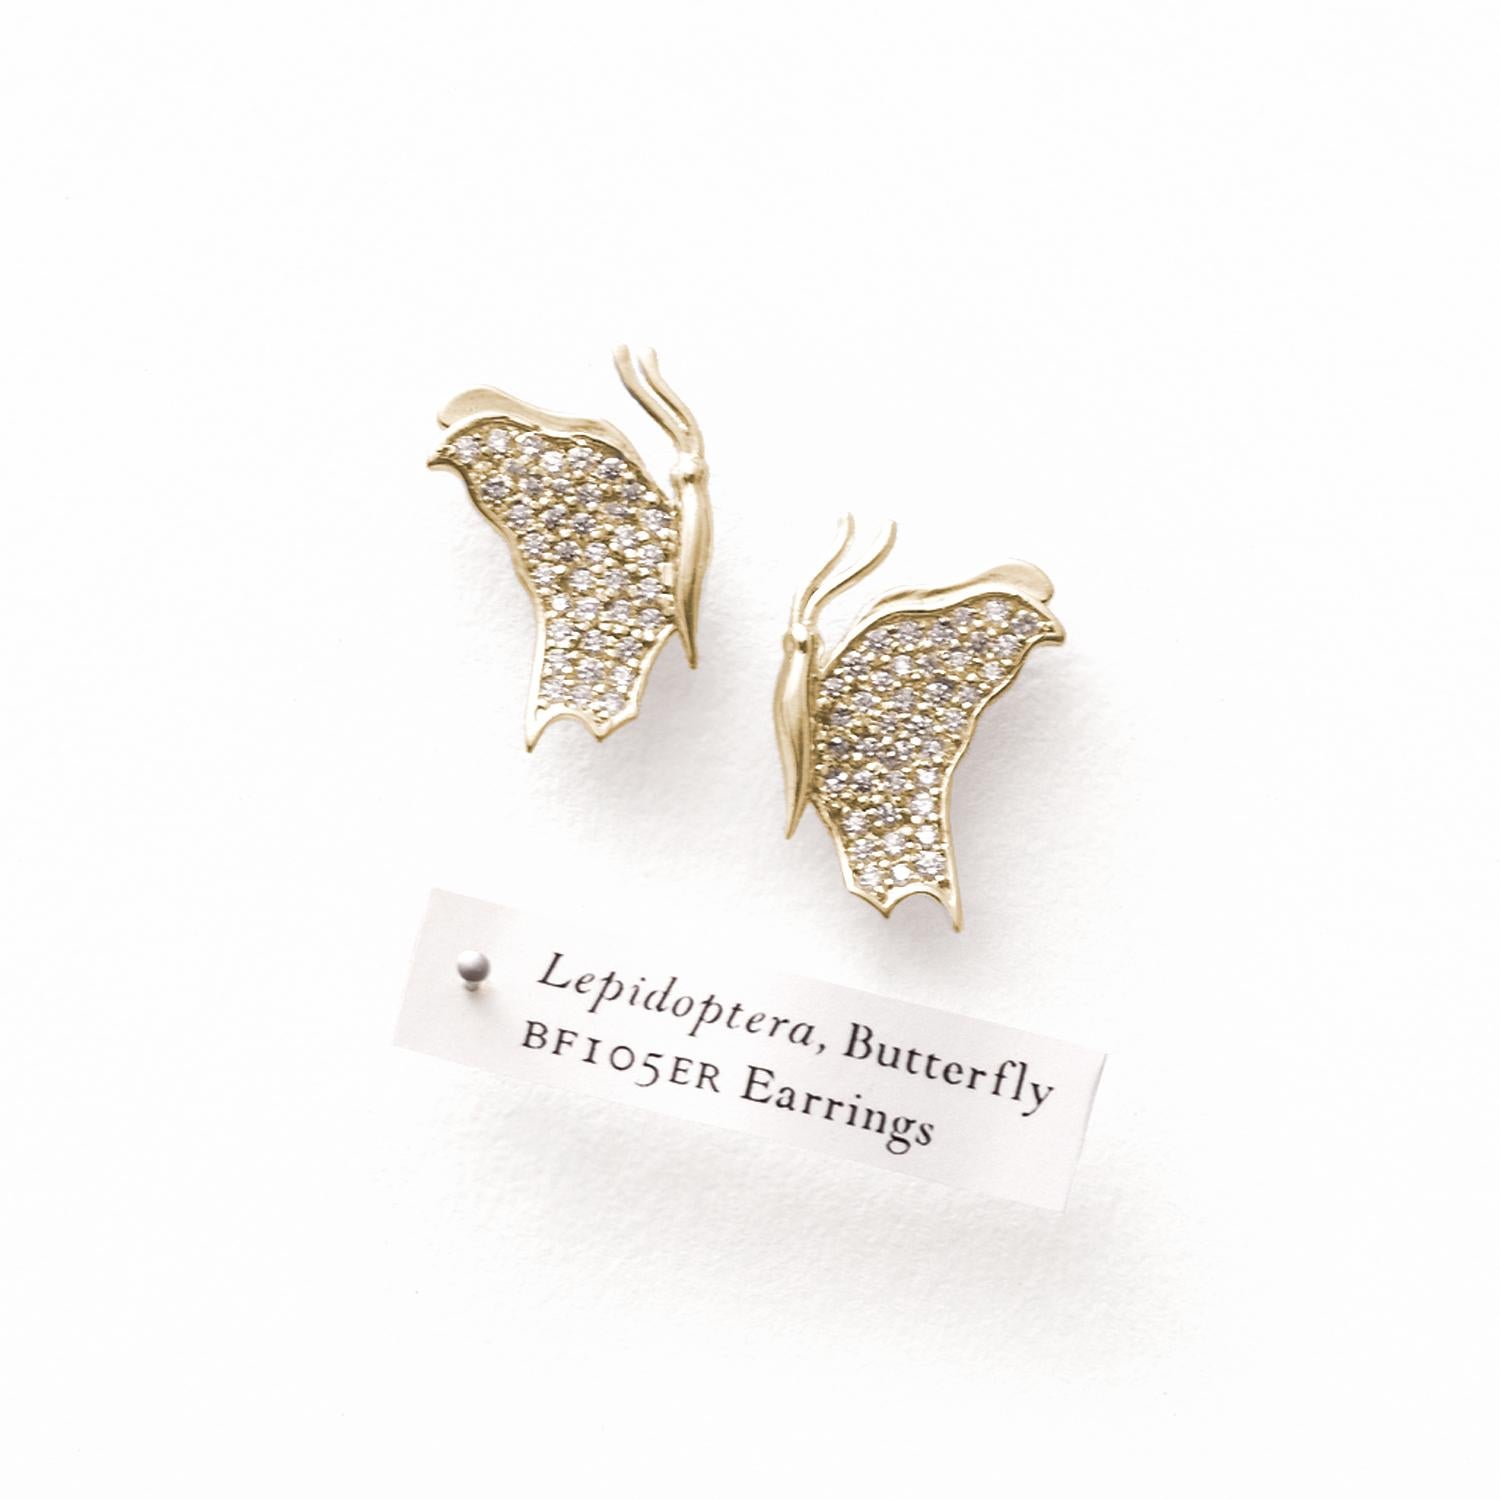 Brilliant Cut Large Butterfly Diamond Earrings 14k yellow gold / Side View For Sale